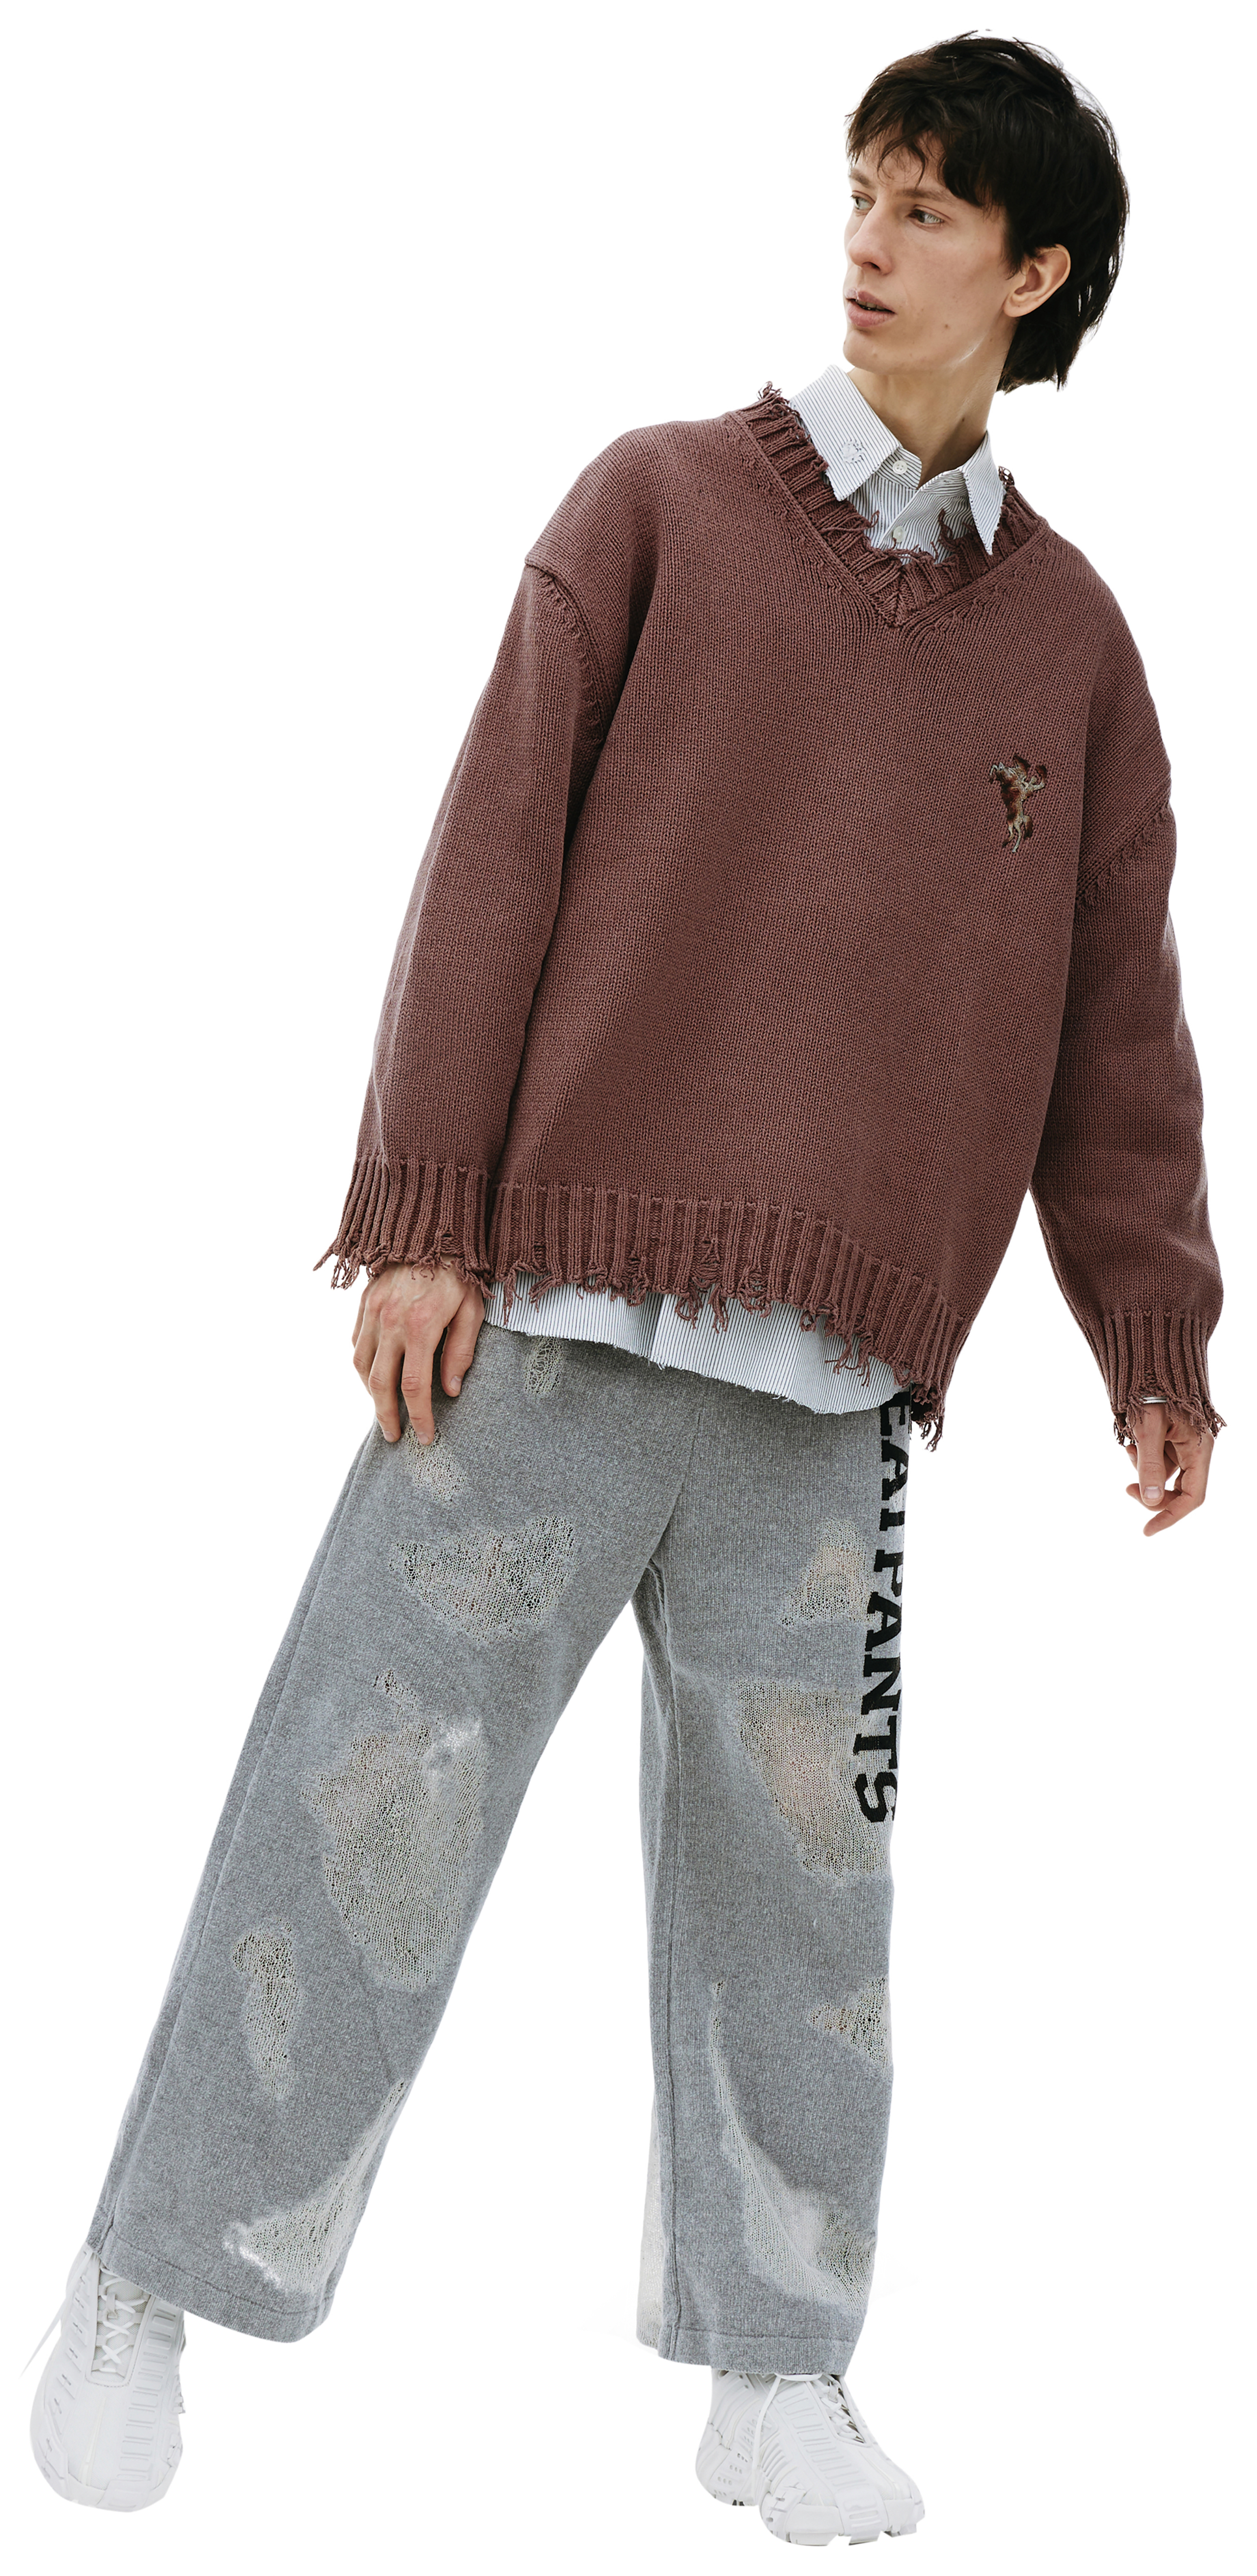 Buy Doublet men brown oversized knit sweater for $447 online on